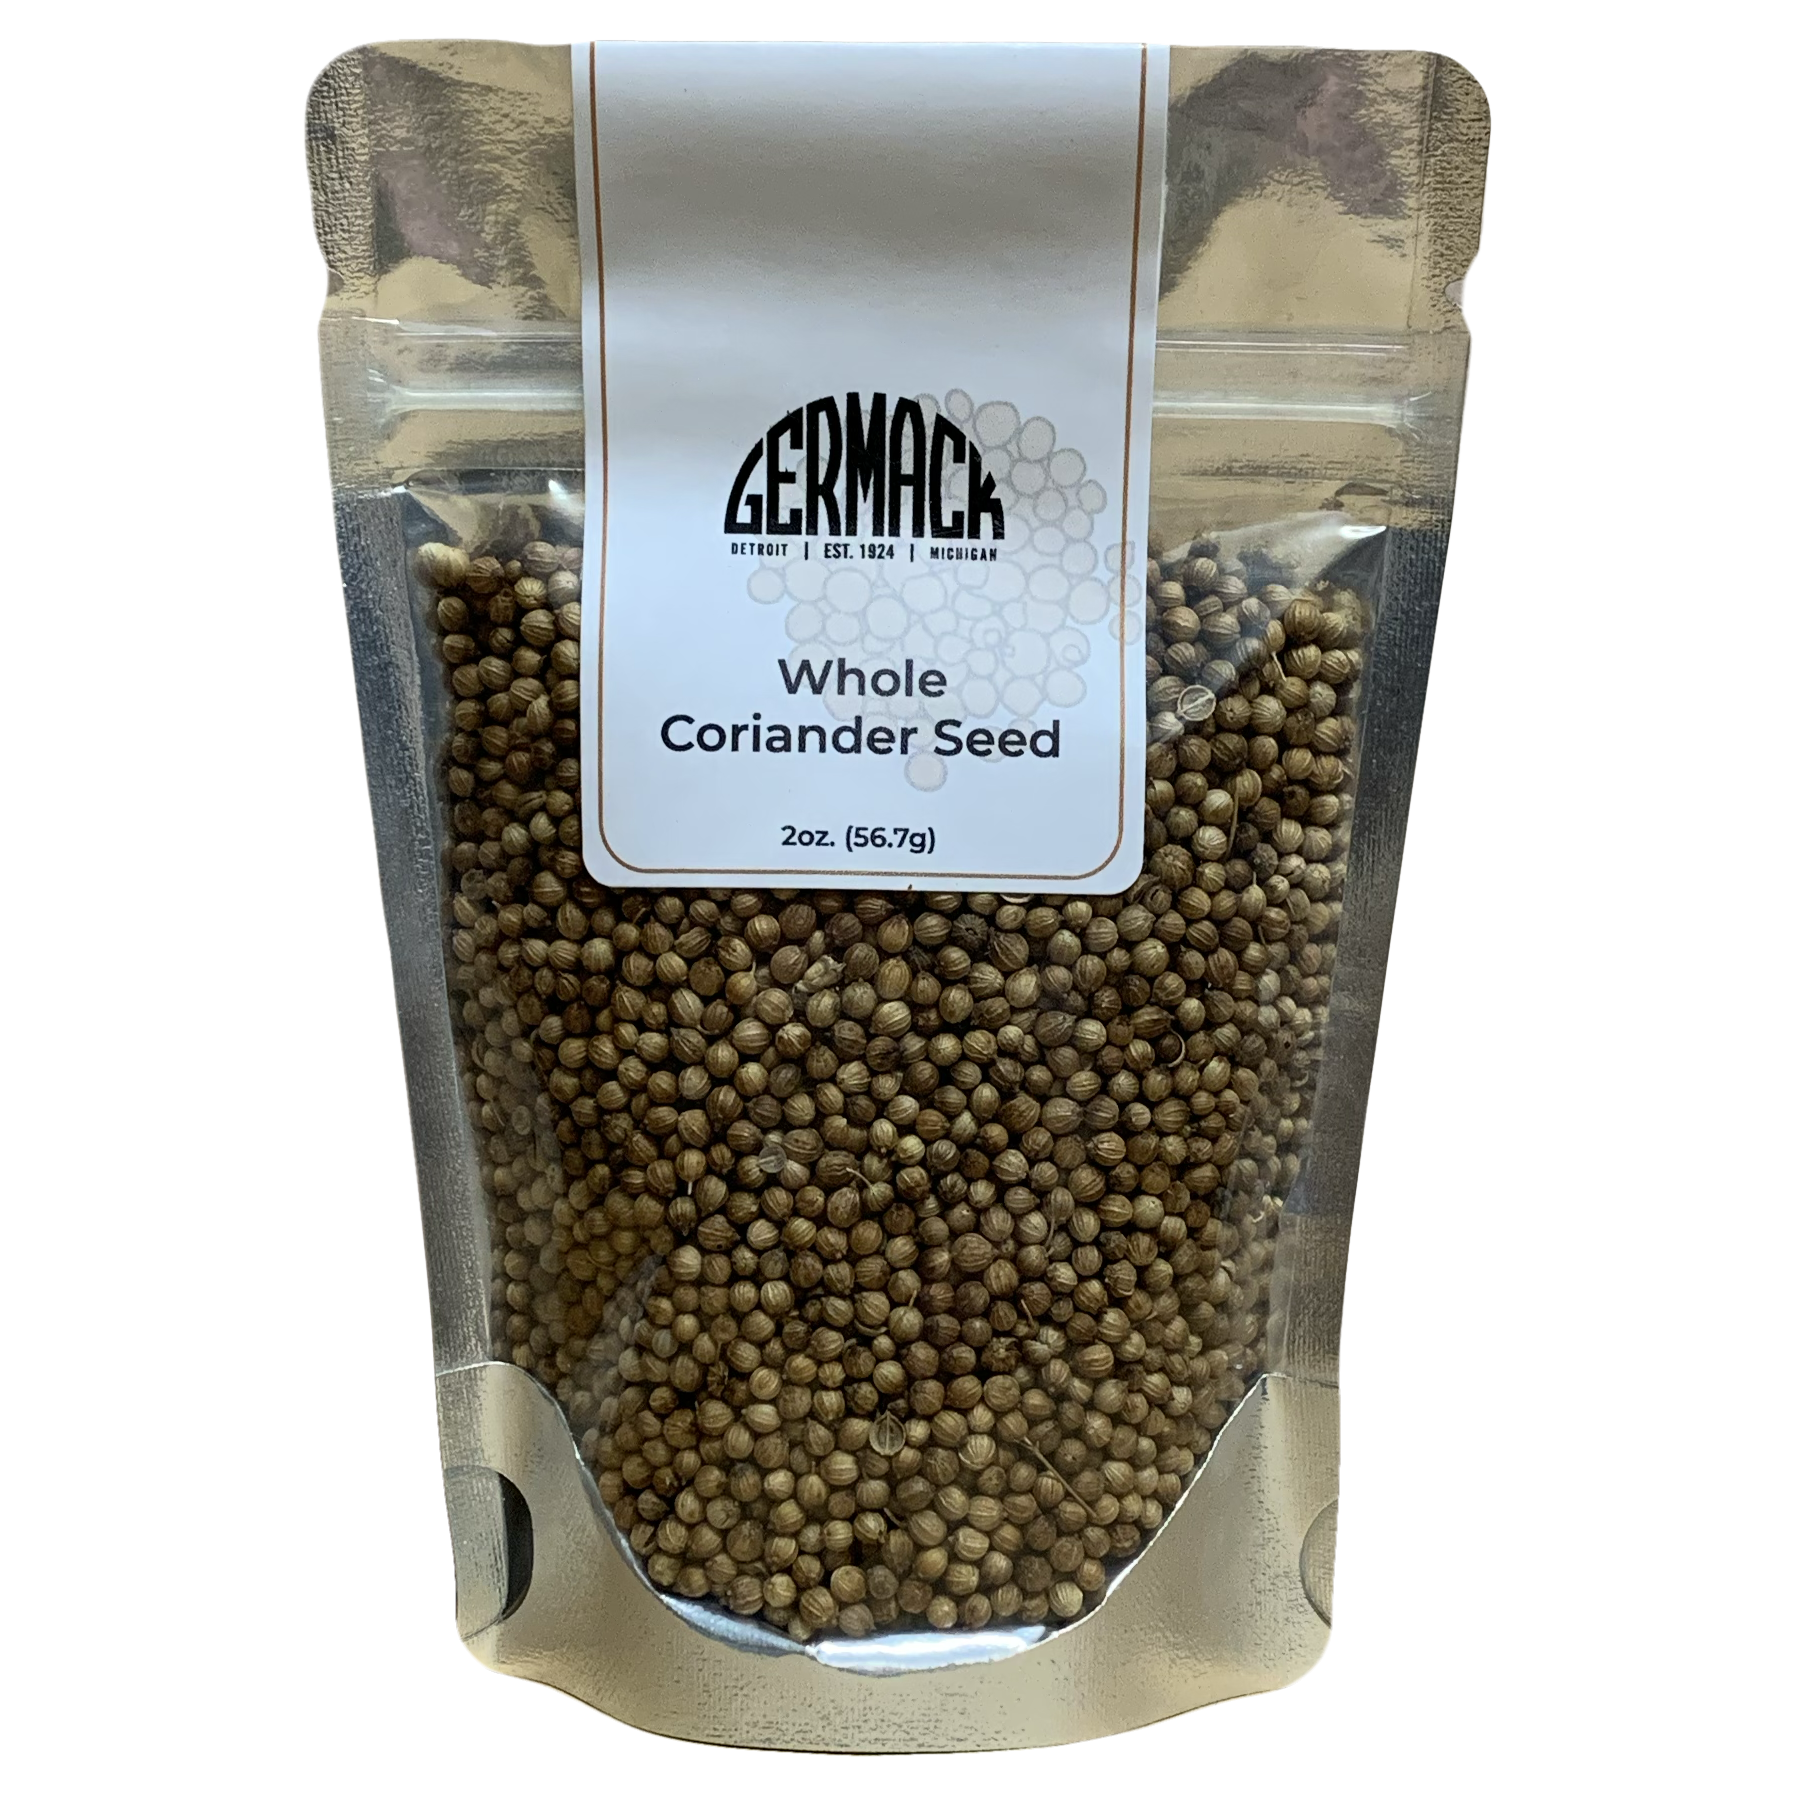 Picture Coriander Seed (Whole), 2oz